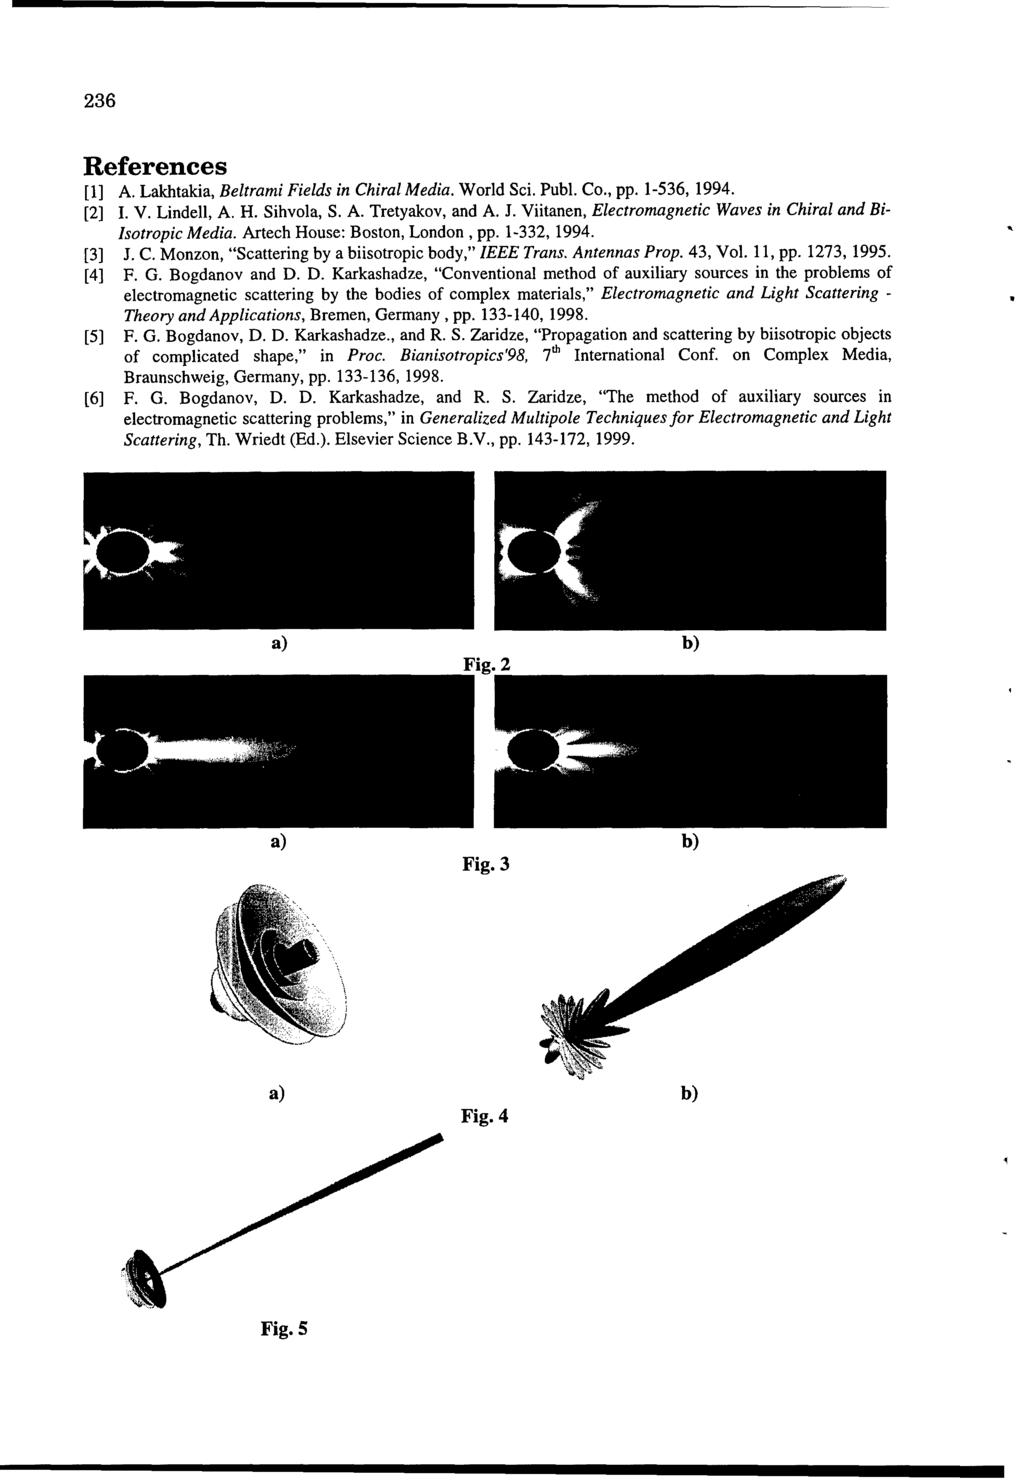 236 References [1] A. Lakhtakia, Beltrami Fields in Chiral Media. World Sci. Publ. Co., pp. 1-536, 1994. [2] I. V. Lindell, A. H. Sihvola, S. A. Tretyakov, and A. J.